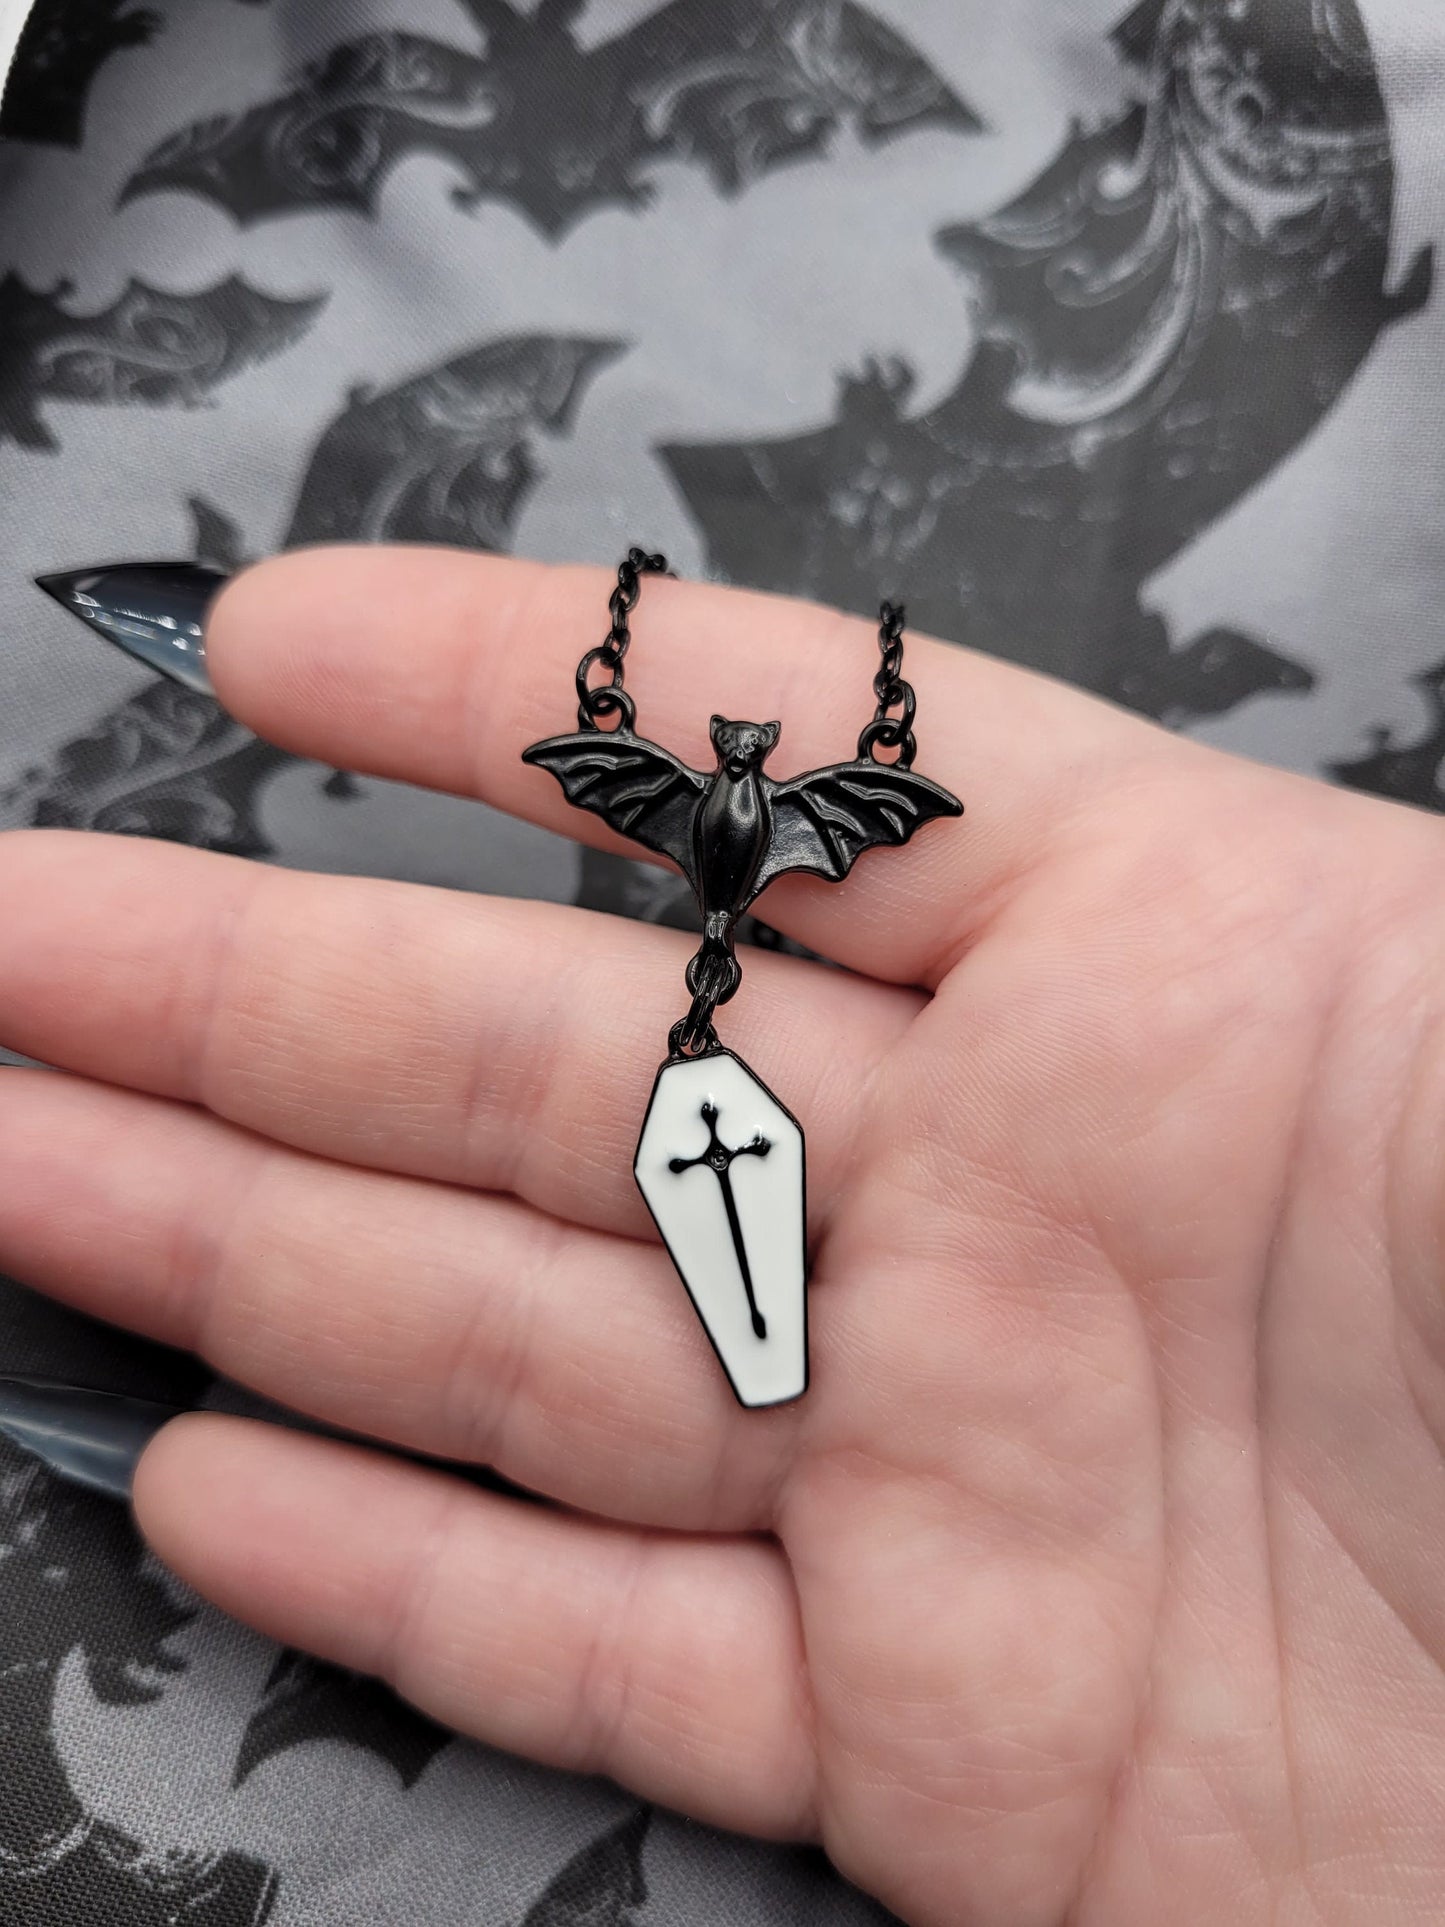 Goth Black Bat Charm Necklace with Black and White Coffin Dangle Charm